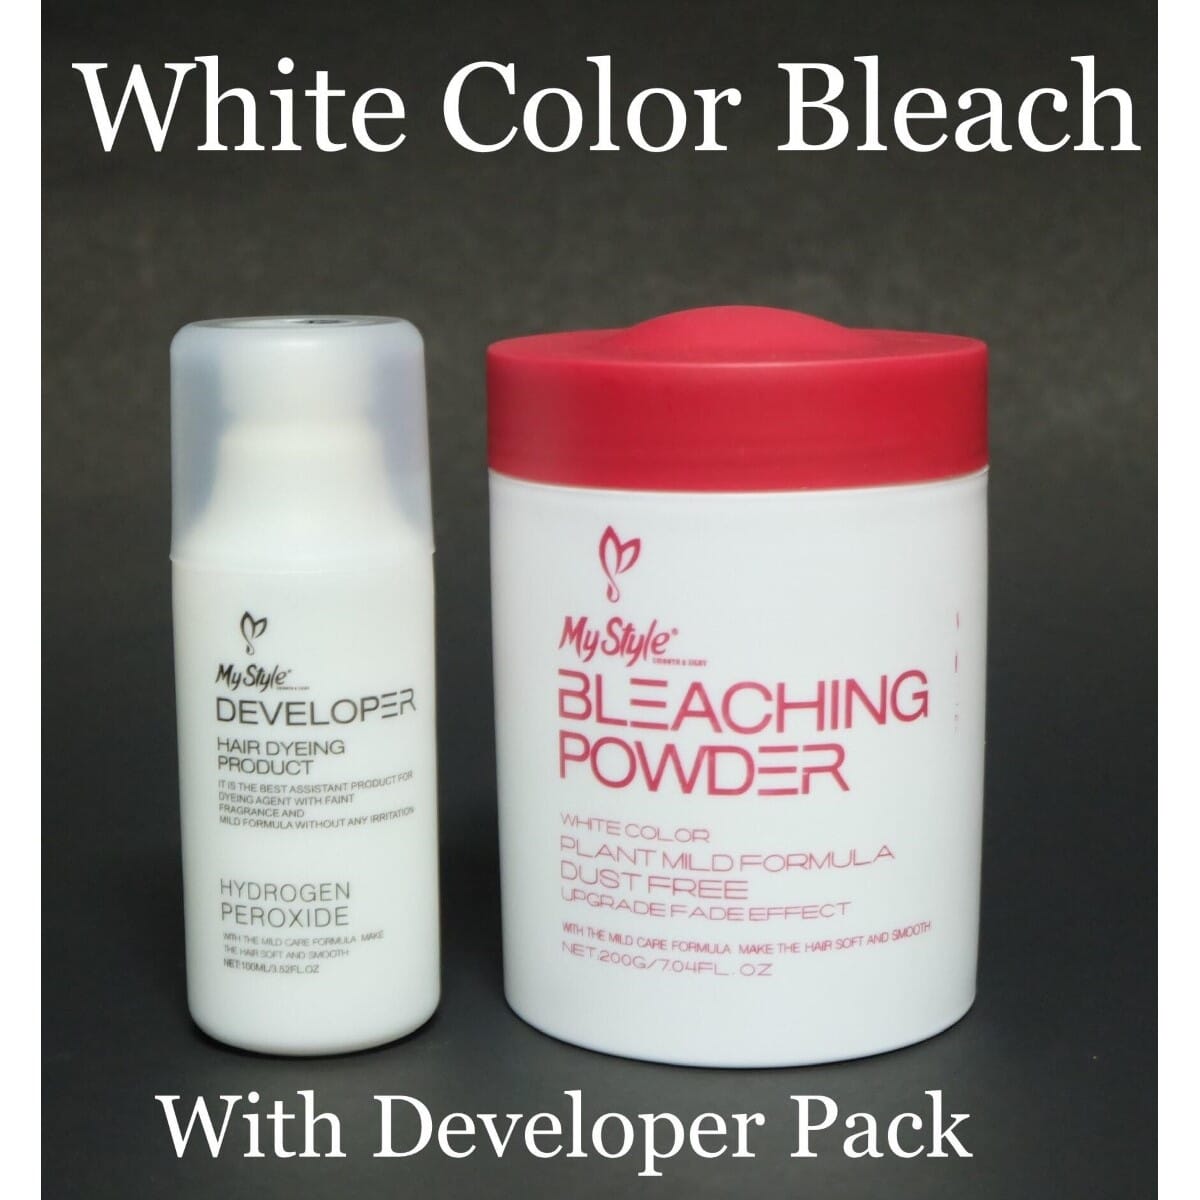 200g White Color Bleaching Powder With 100ml Developer For Hair Dyeing,  Upgrade Fade Effect Hair Bleach: Buy Online at Best Prices in Nepal |  Daraz.com.np